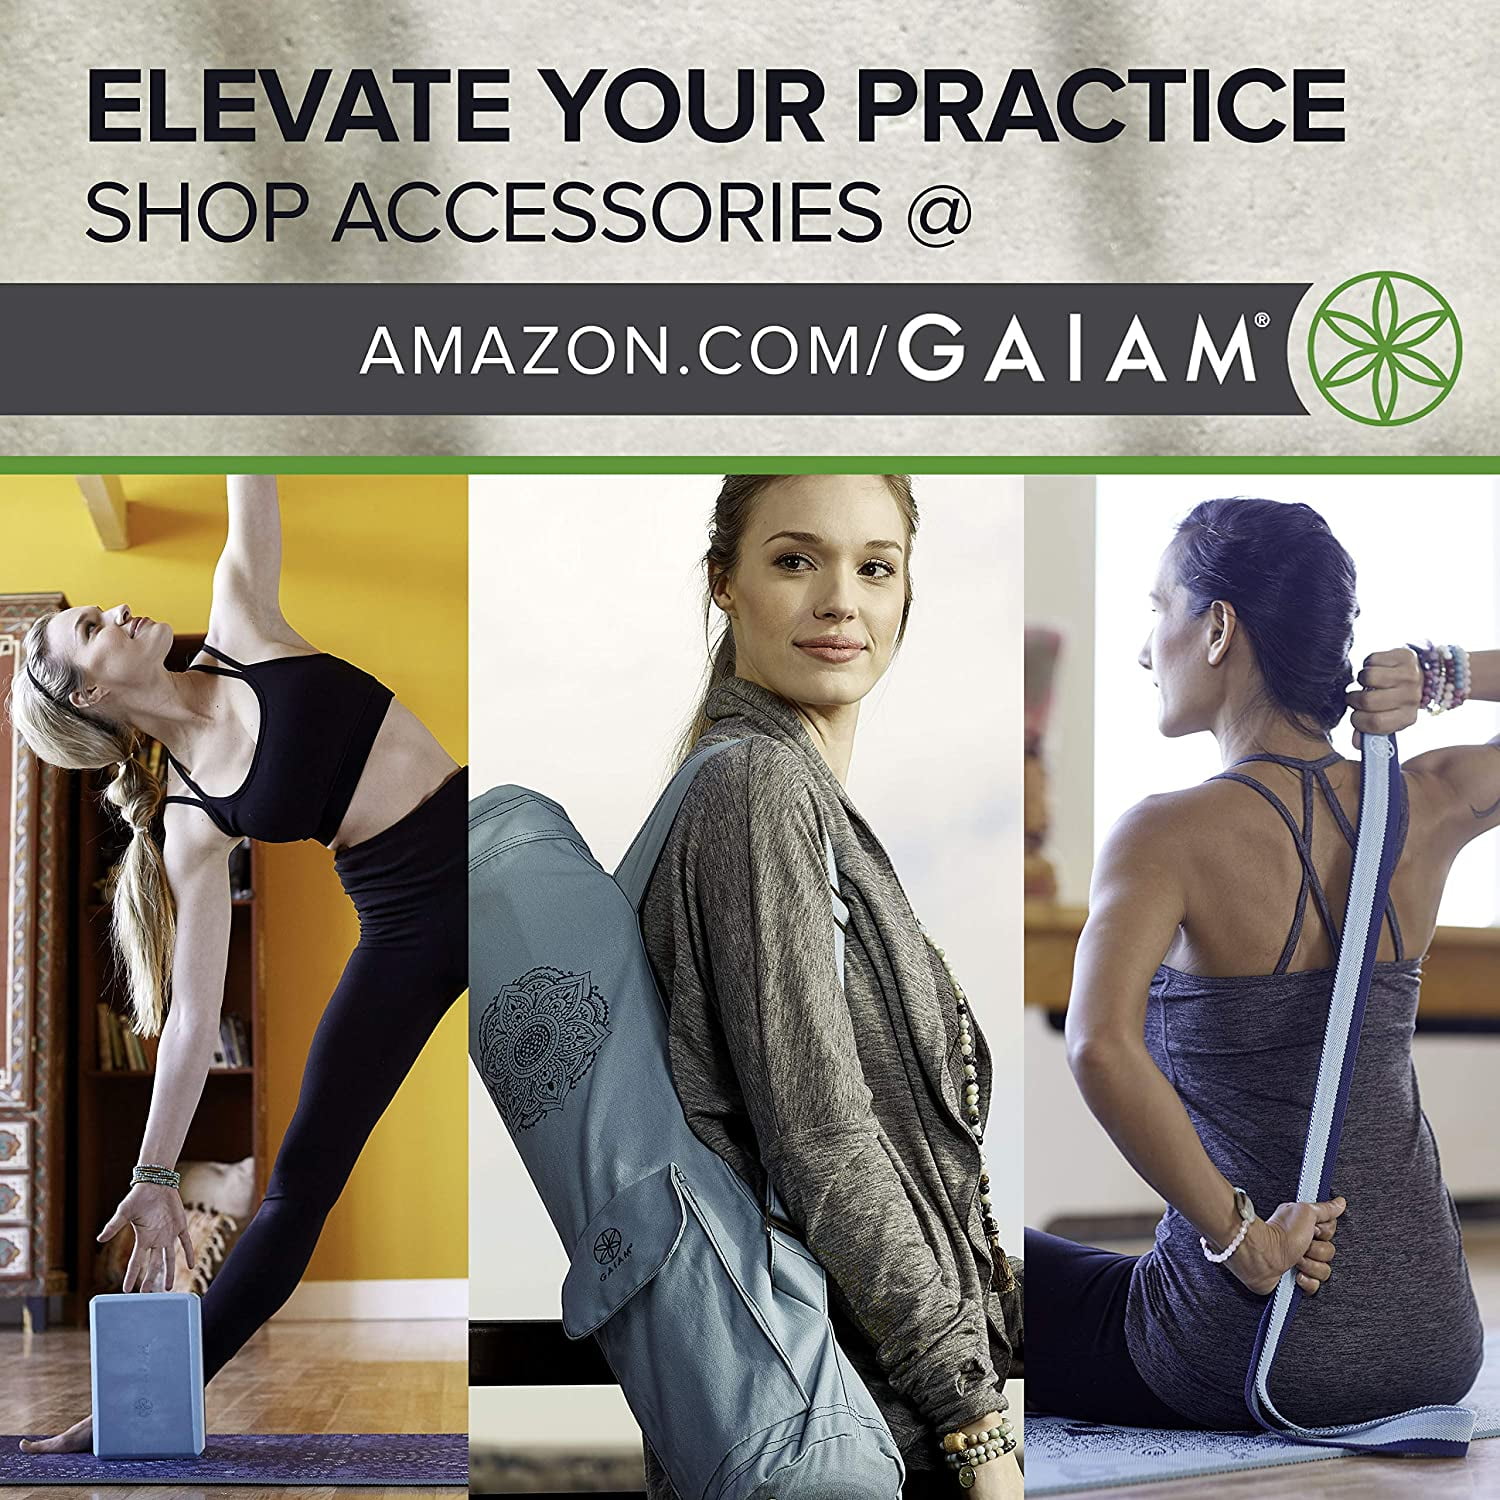 Premium 6mm Print Extra Thick Non Slip Exercise & Fitness Mat for All Types of Yoga Pilates & Floor Workouts Gaiam Yoga Mat 68 x 24 x 6mm 